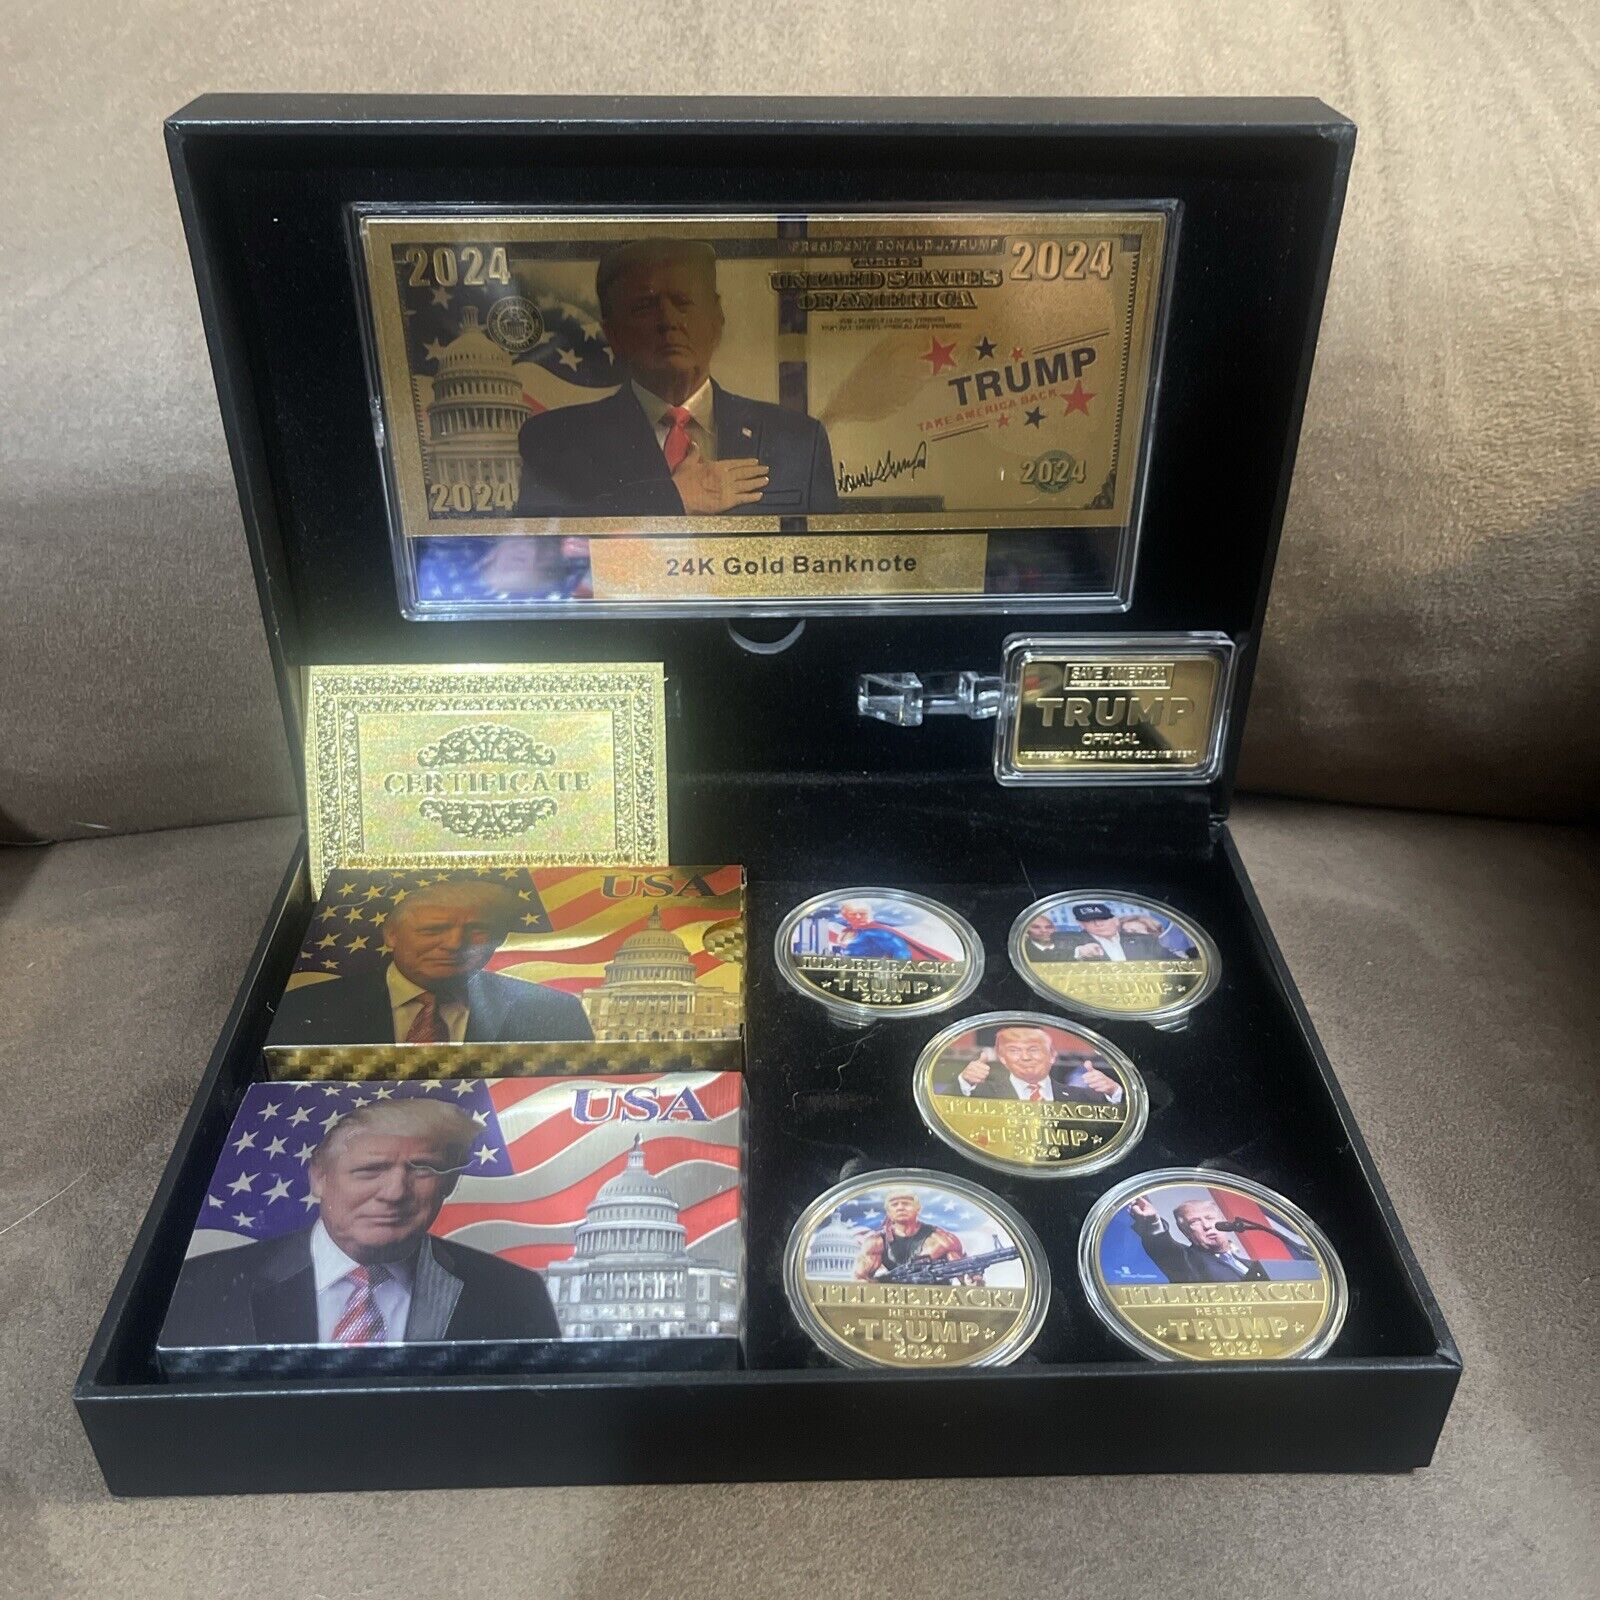 Trump 2024 Collector Set Coins Cards & Certificates